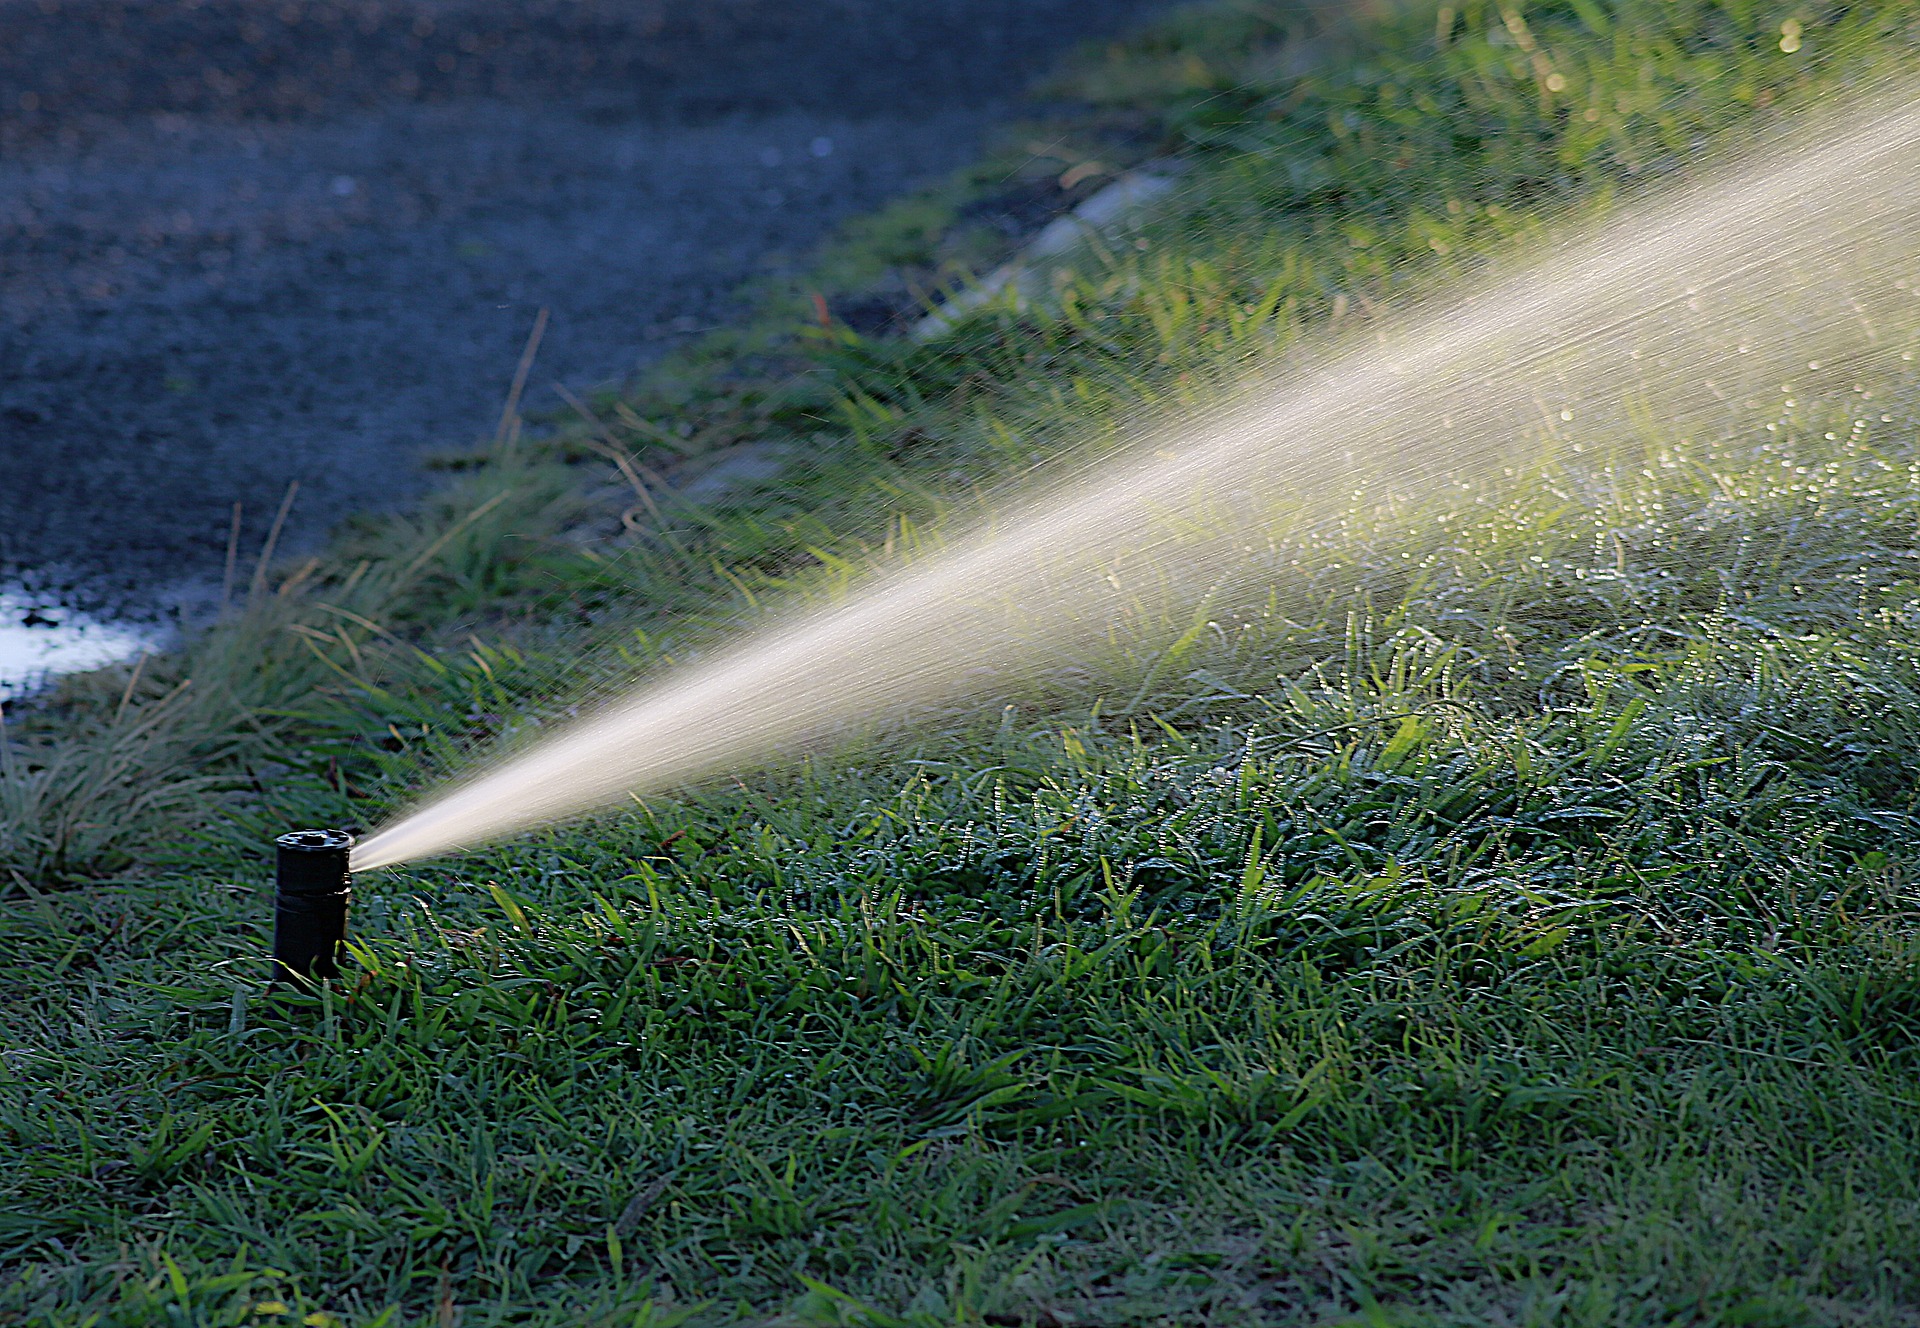 Winterizing sprinklers, fountains and bubblers